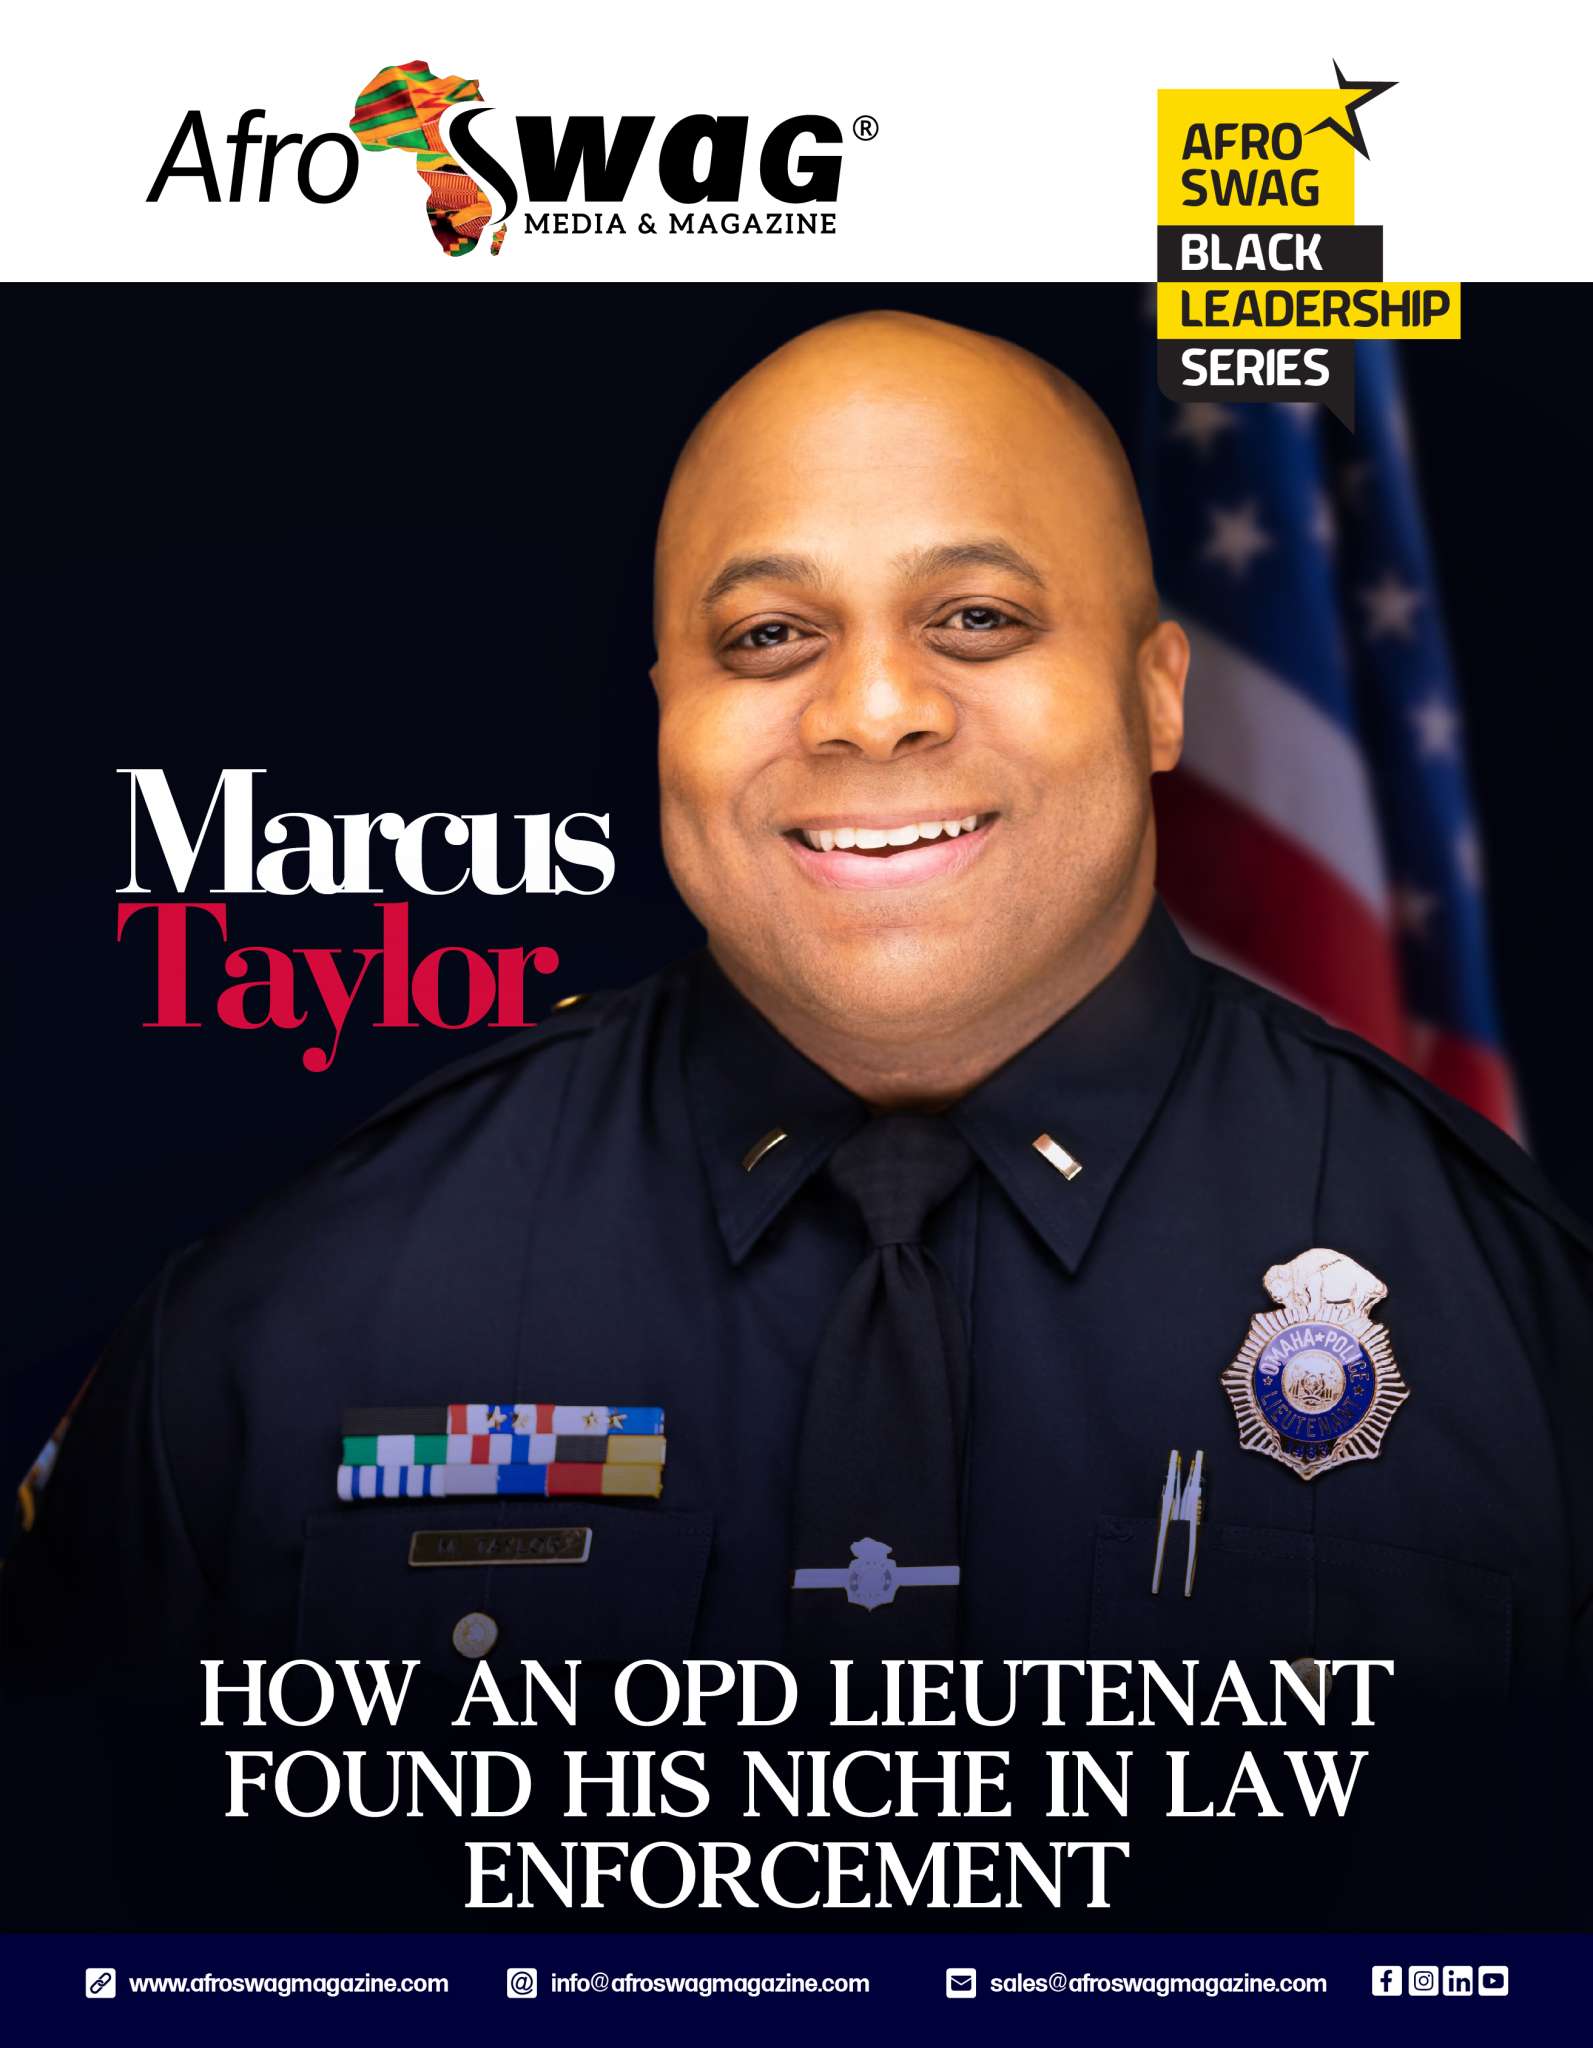 Marcus Taylor: Called to Serve  Omaha Police Department Lieutenant Found His Niche in Law Enforcement